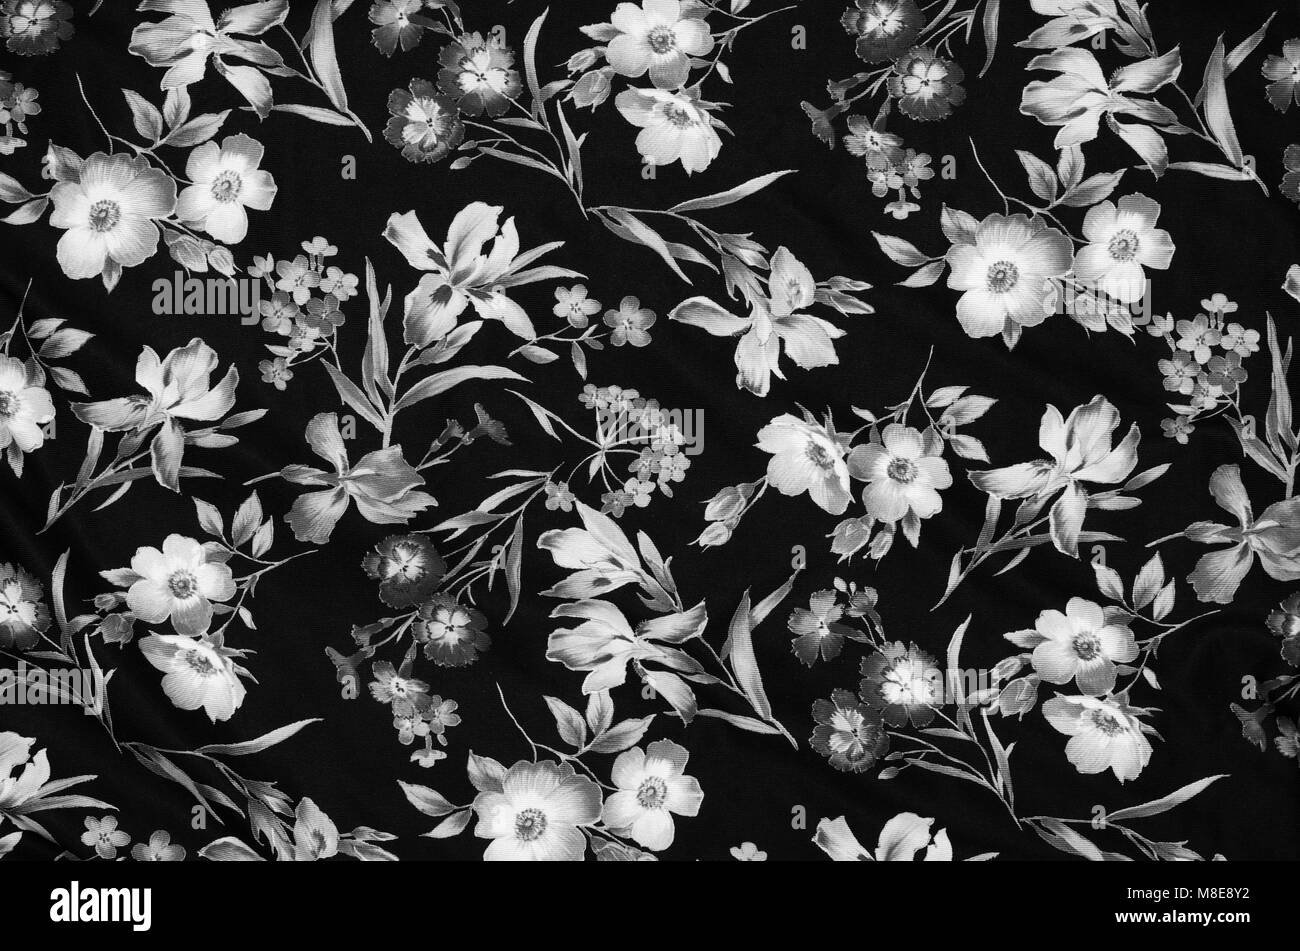 Rose fabric texture Black and White Stock Photos & Images - Alamy